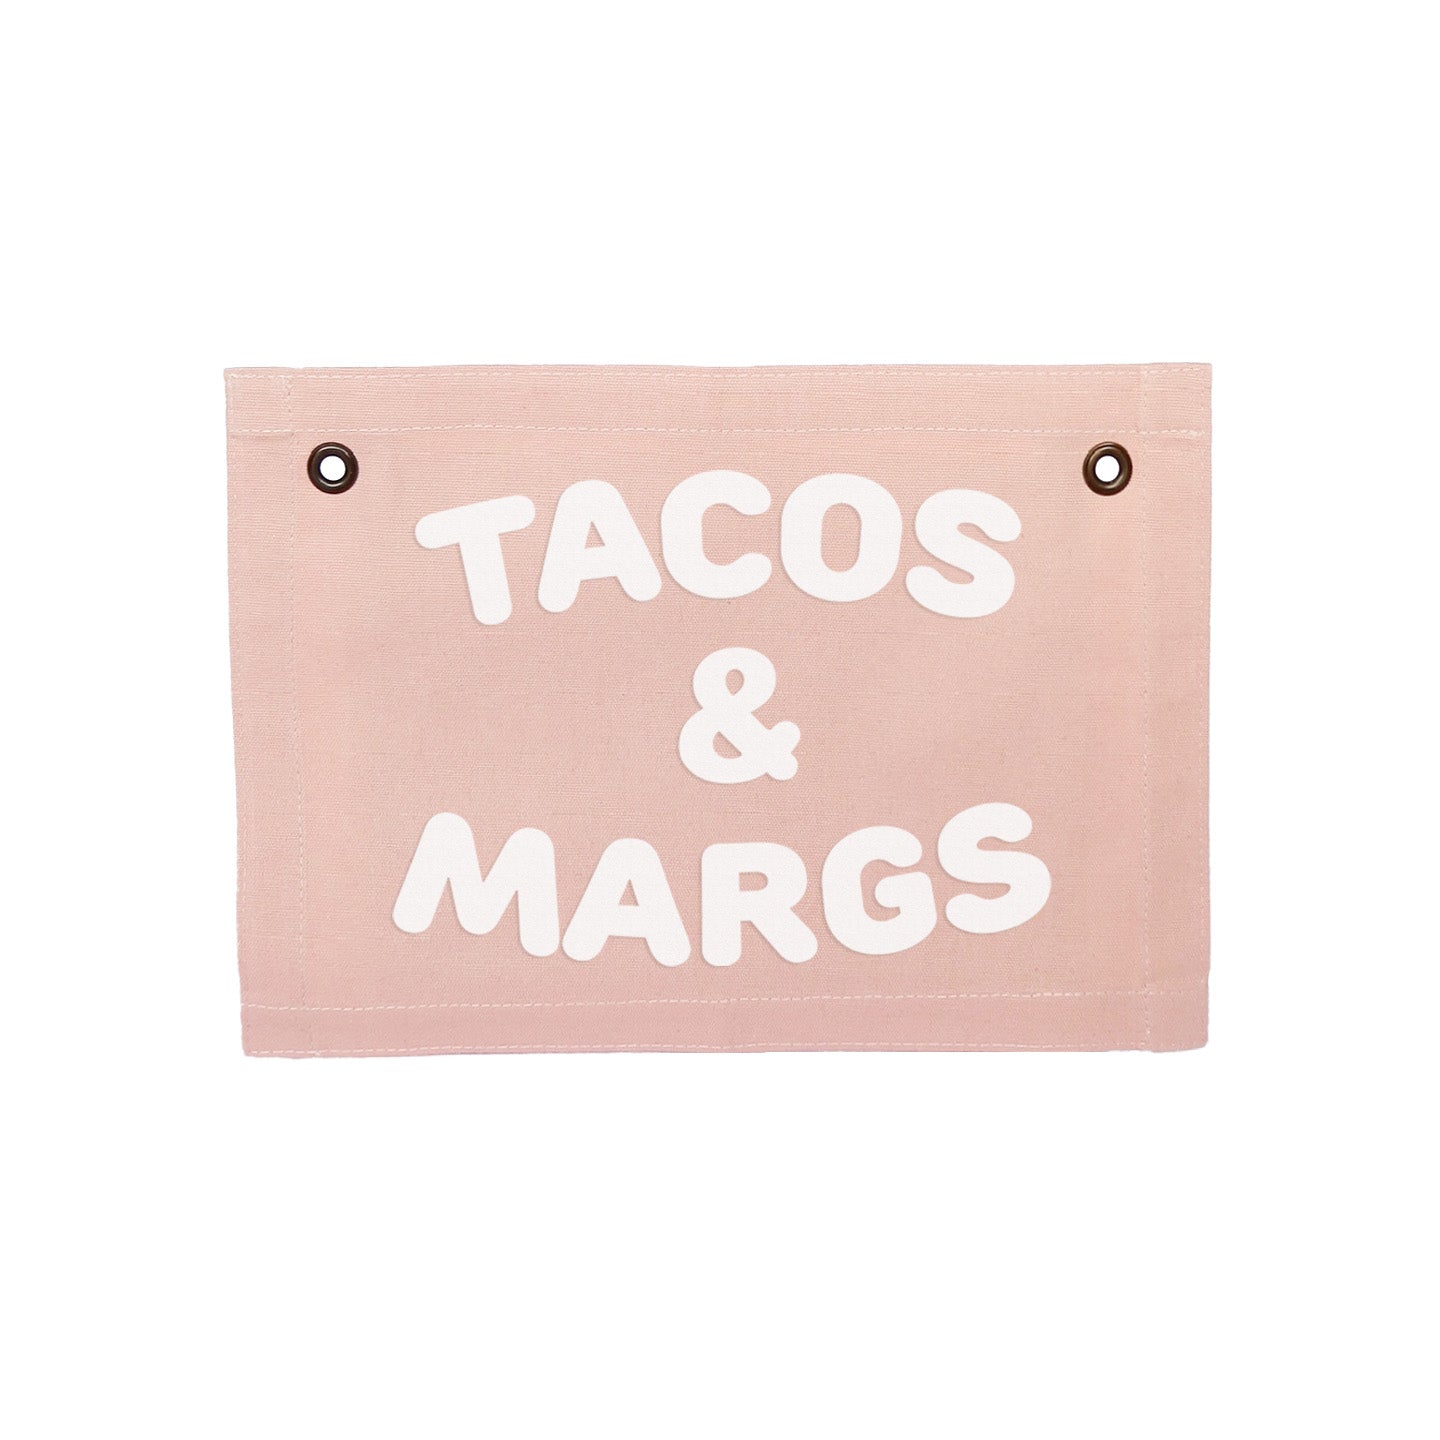 Tacos & Margs Small Canvas Flag